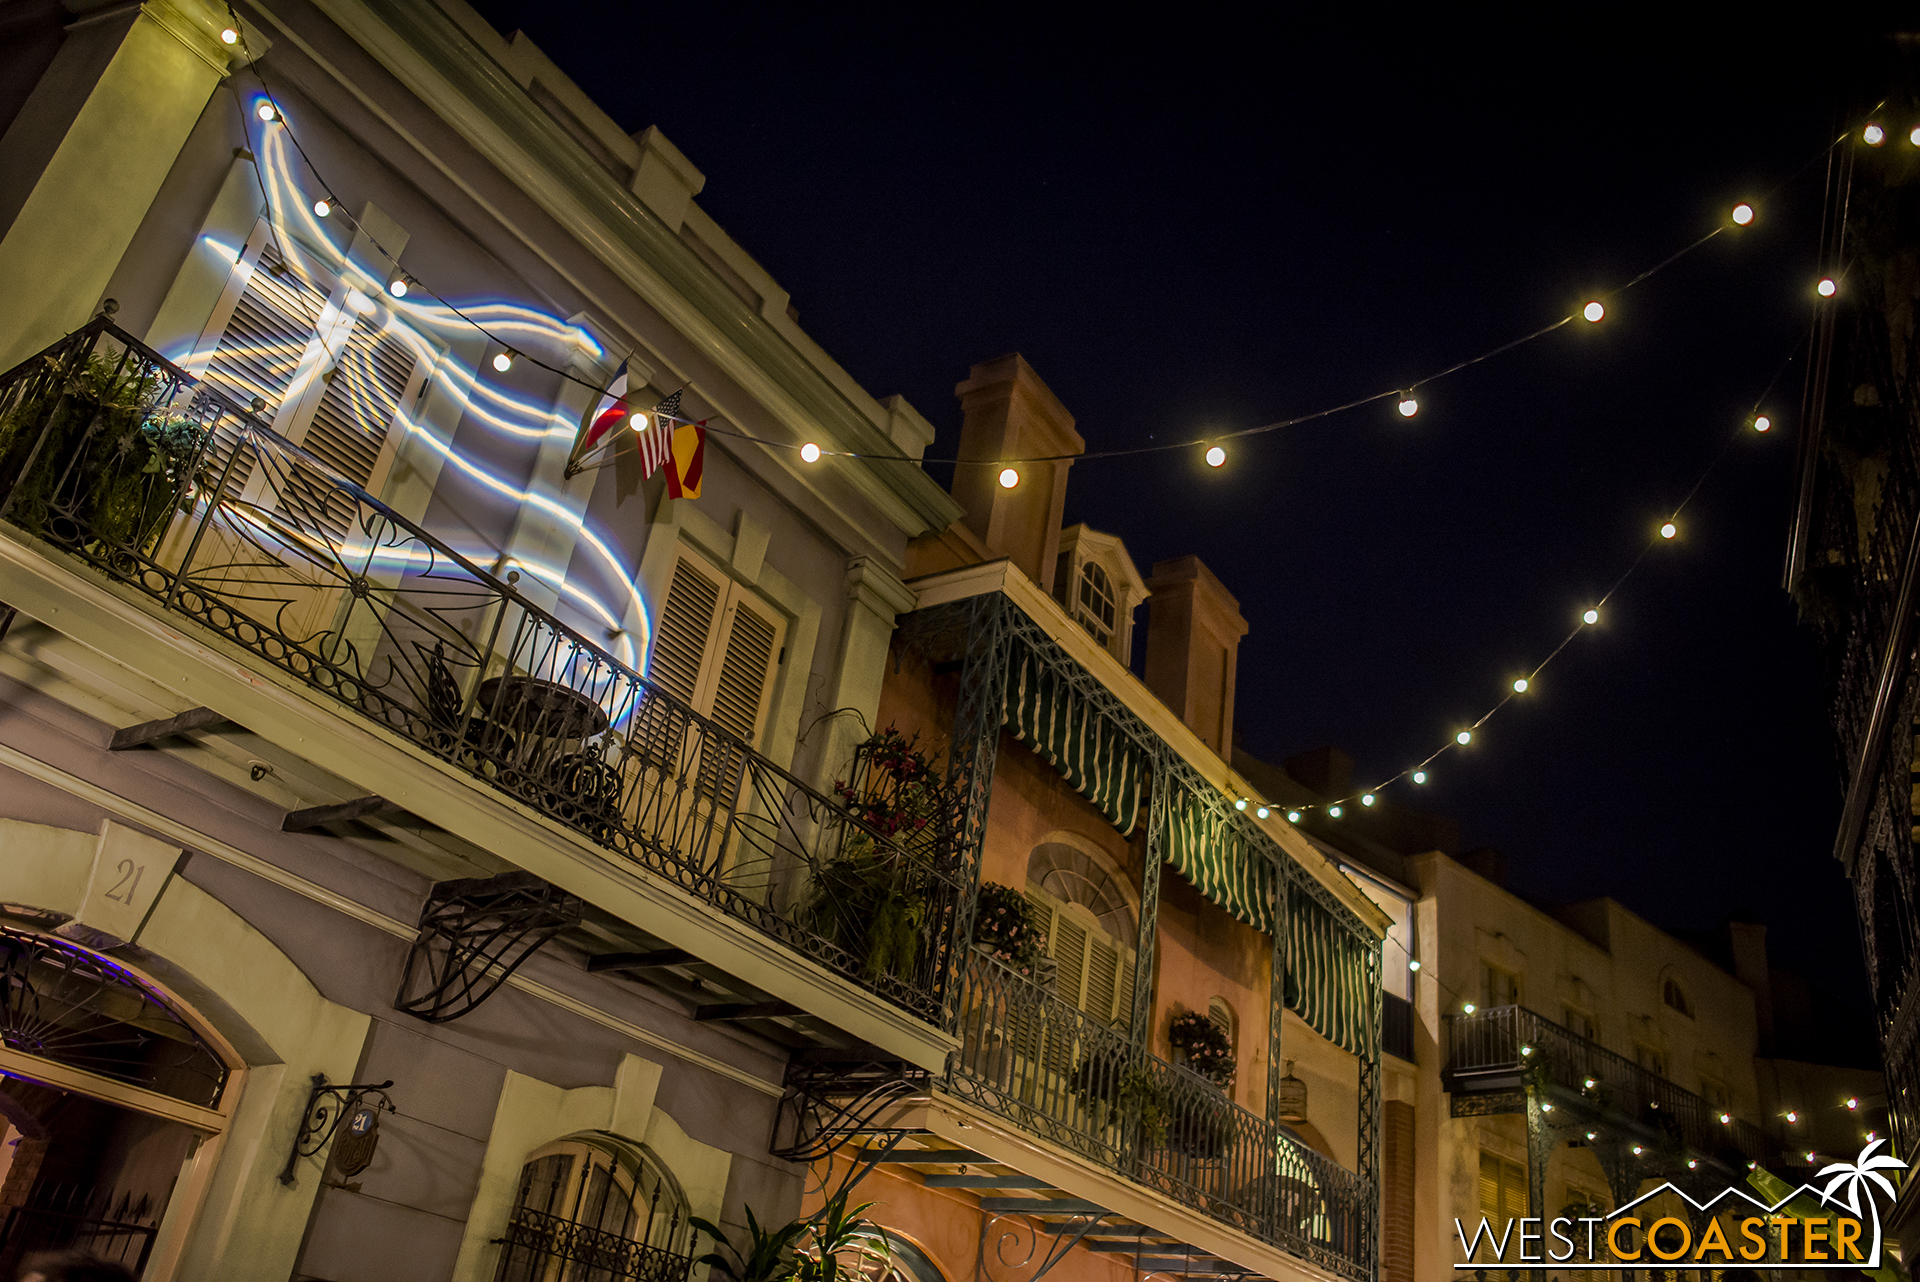  I don't remember seeing this last year (though it could have totally been there), but I loved this projection of Zero against the New Orleans Square facade on Royal Street. 